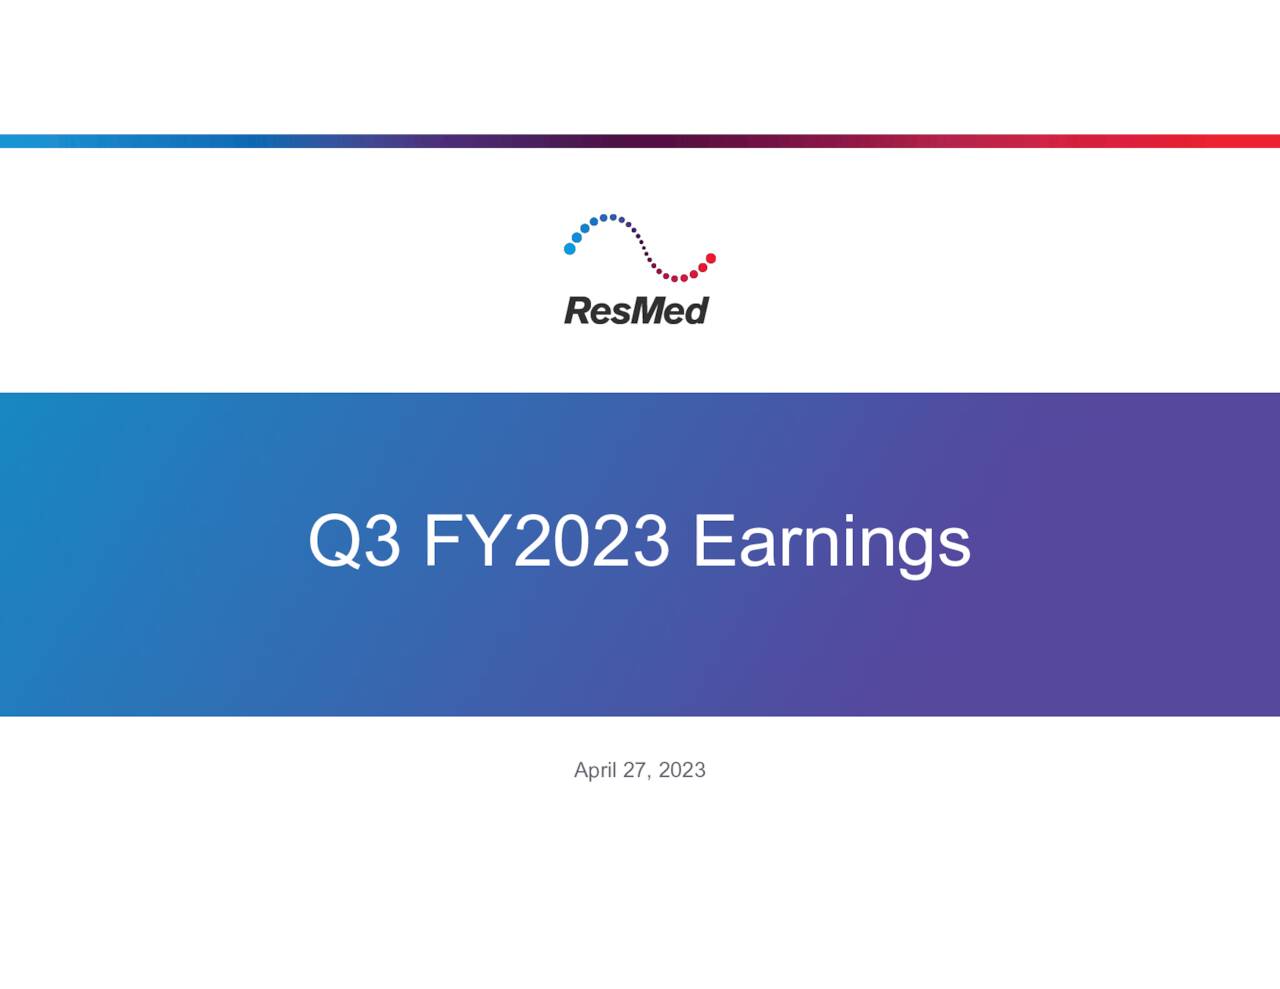 ResMed Inc. 2023 Q3 Results Earnings Call Presentation (NYSERMD